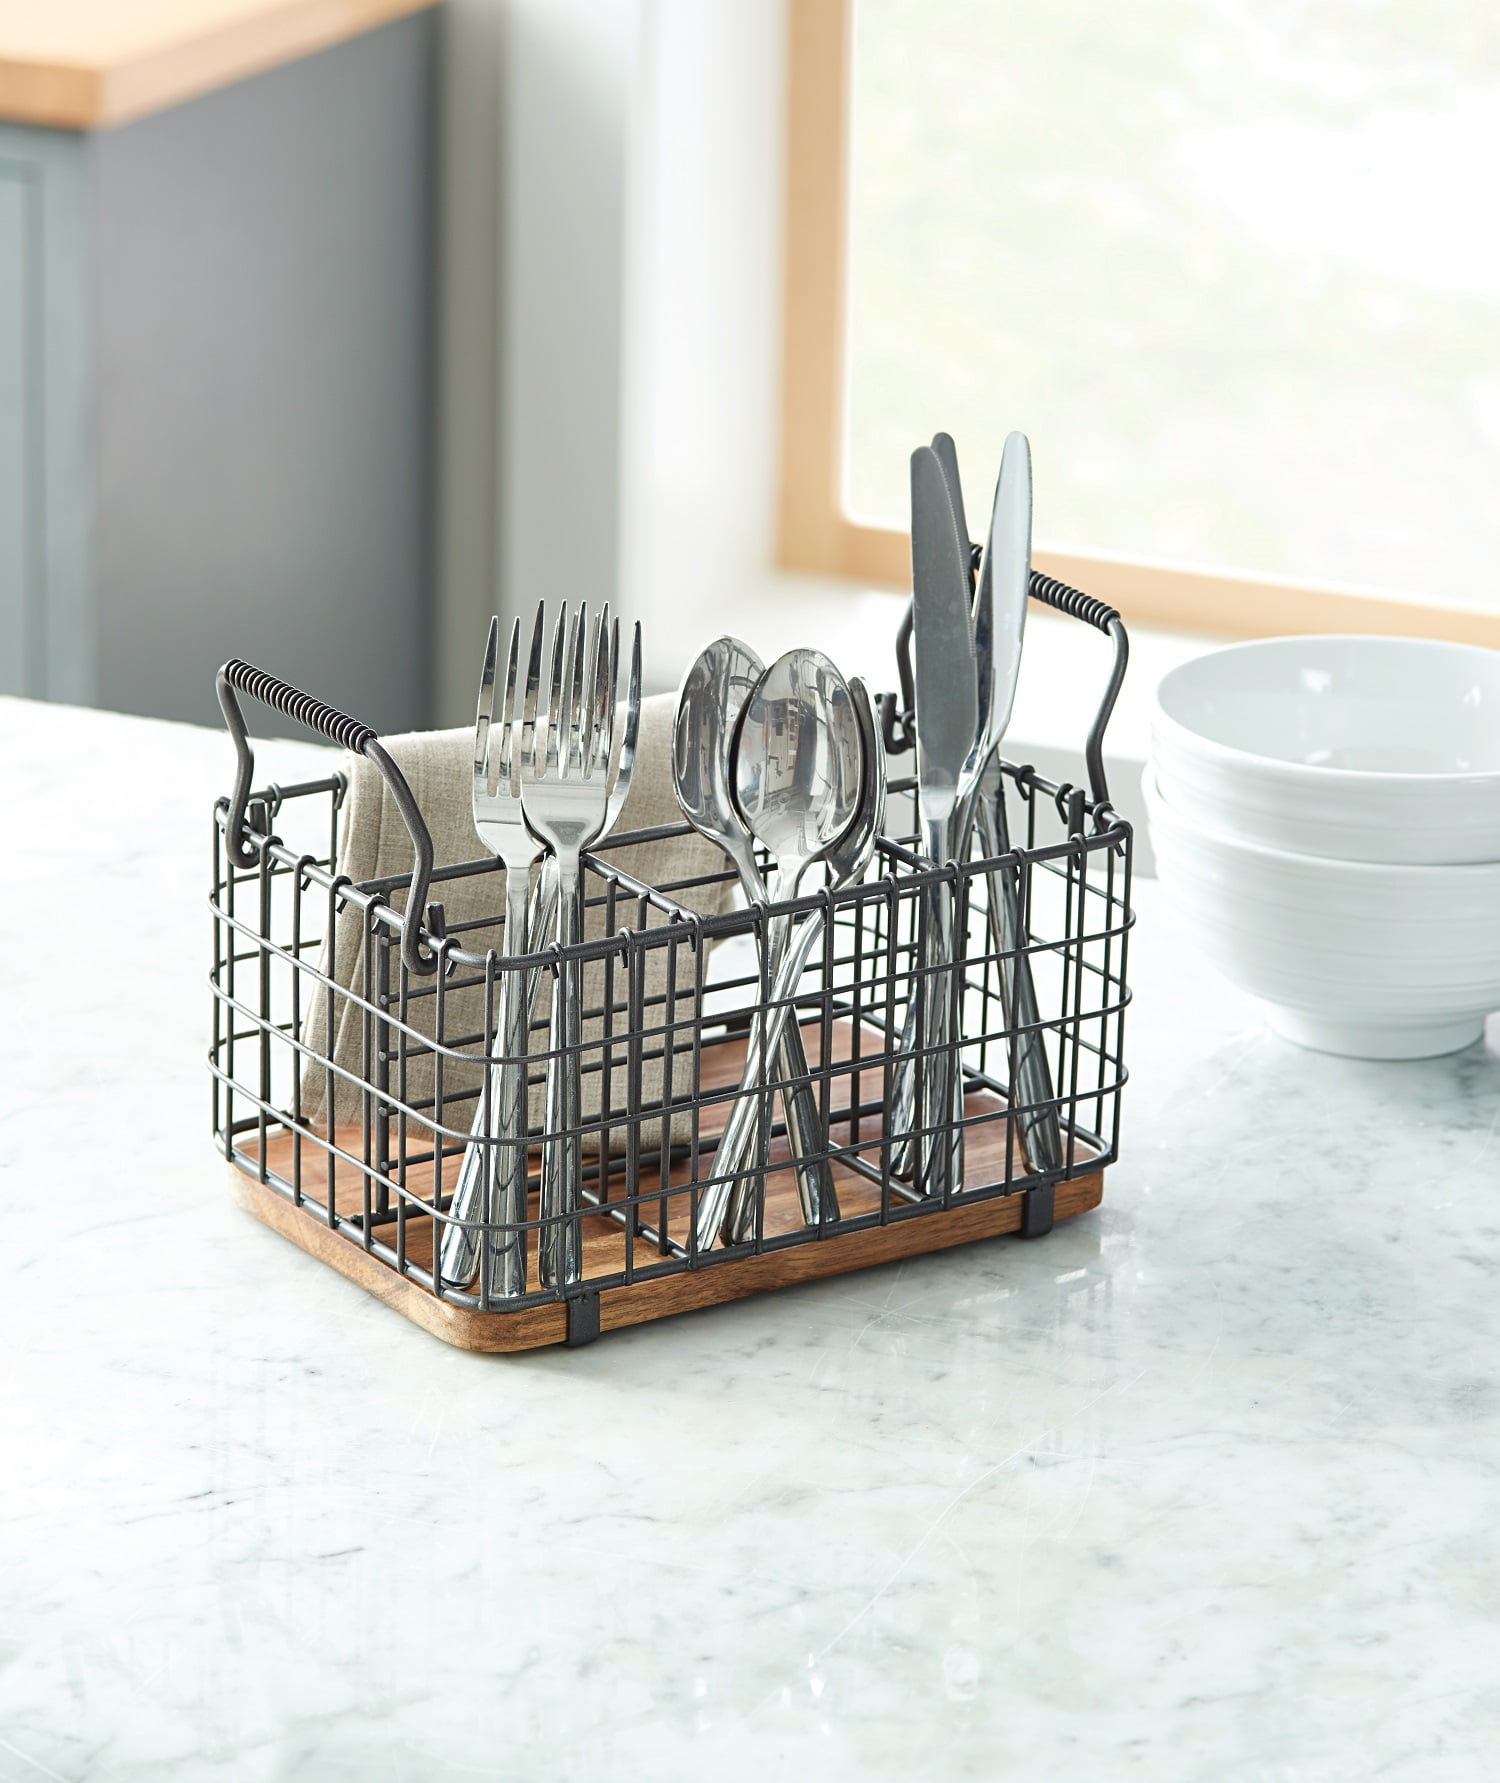 Better Homes & Gardens Wire Utensil Caddy, Gray Color with Wood Base